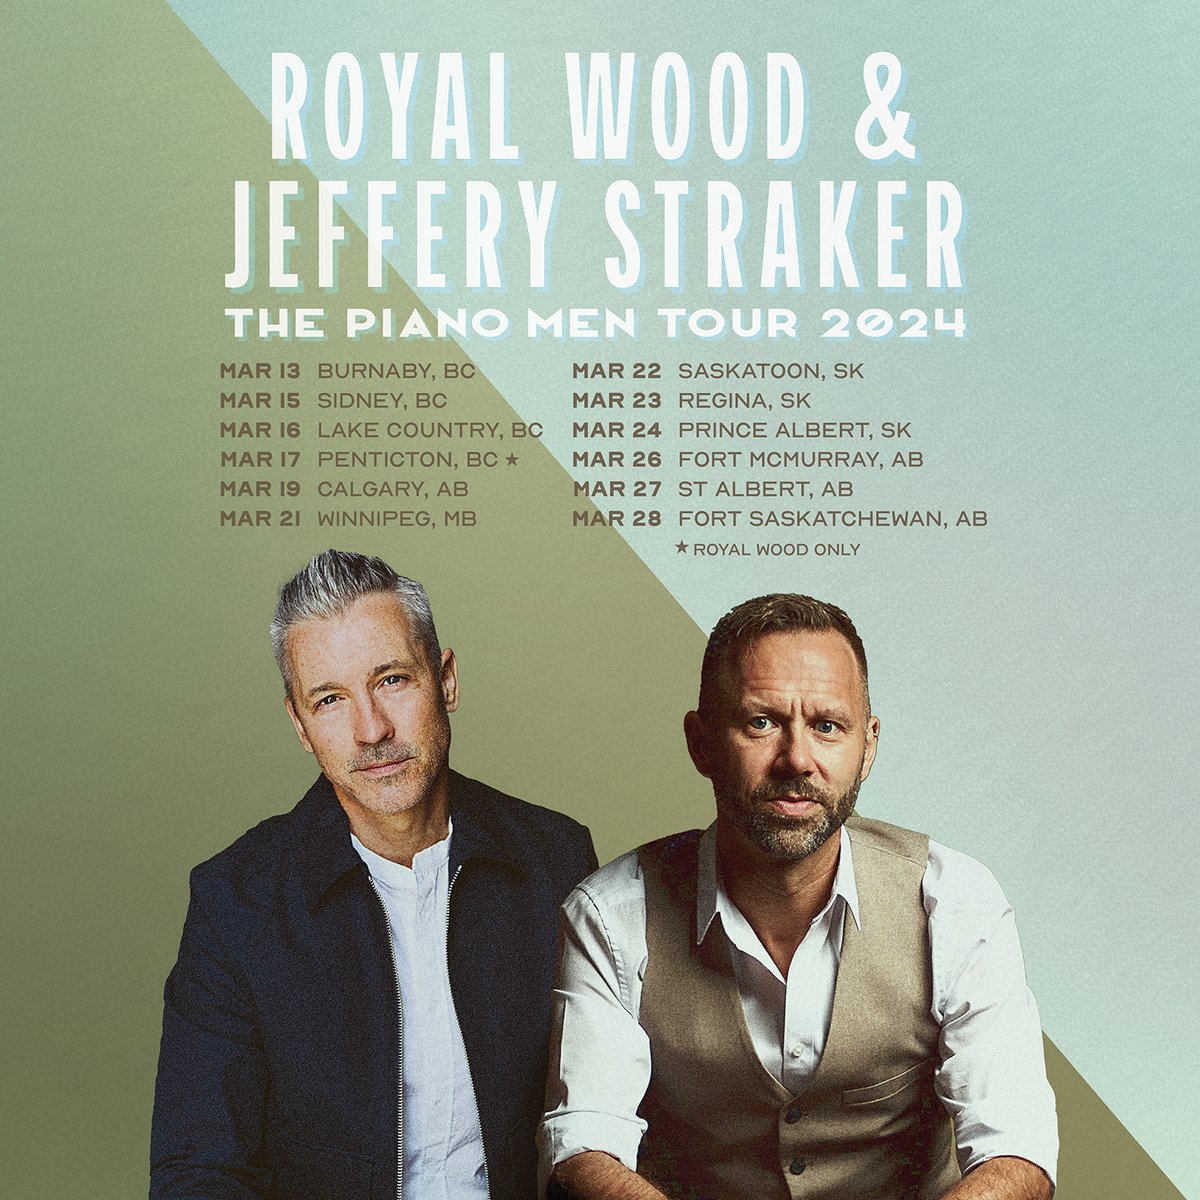 Getting ready to head out on the road across Western Canada in March. What a treat to perform 11 shows in some fancy theatres at incredible pianos in a double bill with @RoyalWood ! If we're close to you I hope you can join us. PS - Regina @DarkeHallRegina is SO close to SoldOut!